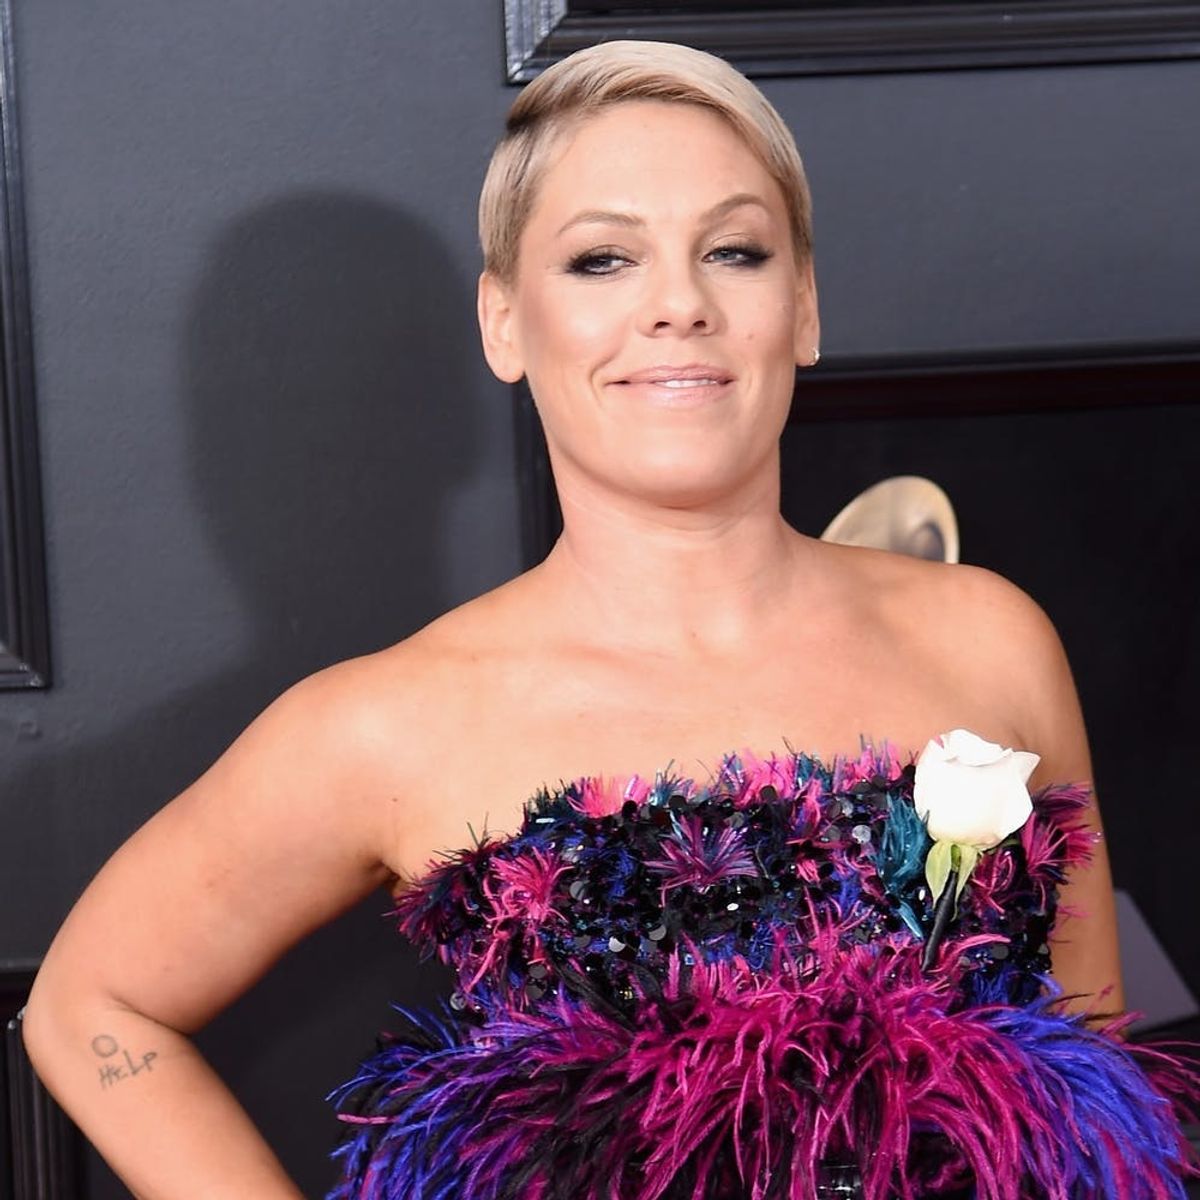 Pink, Katy Perry, and More Female Artists Fire Back at Grammys President Telling Women to ‘Step Up’